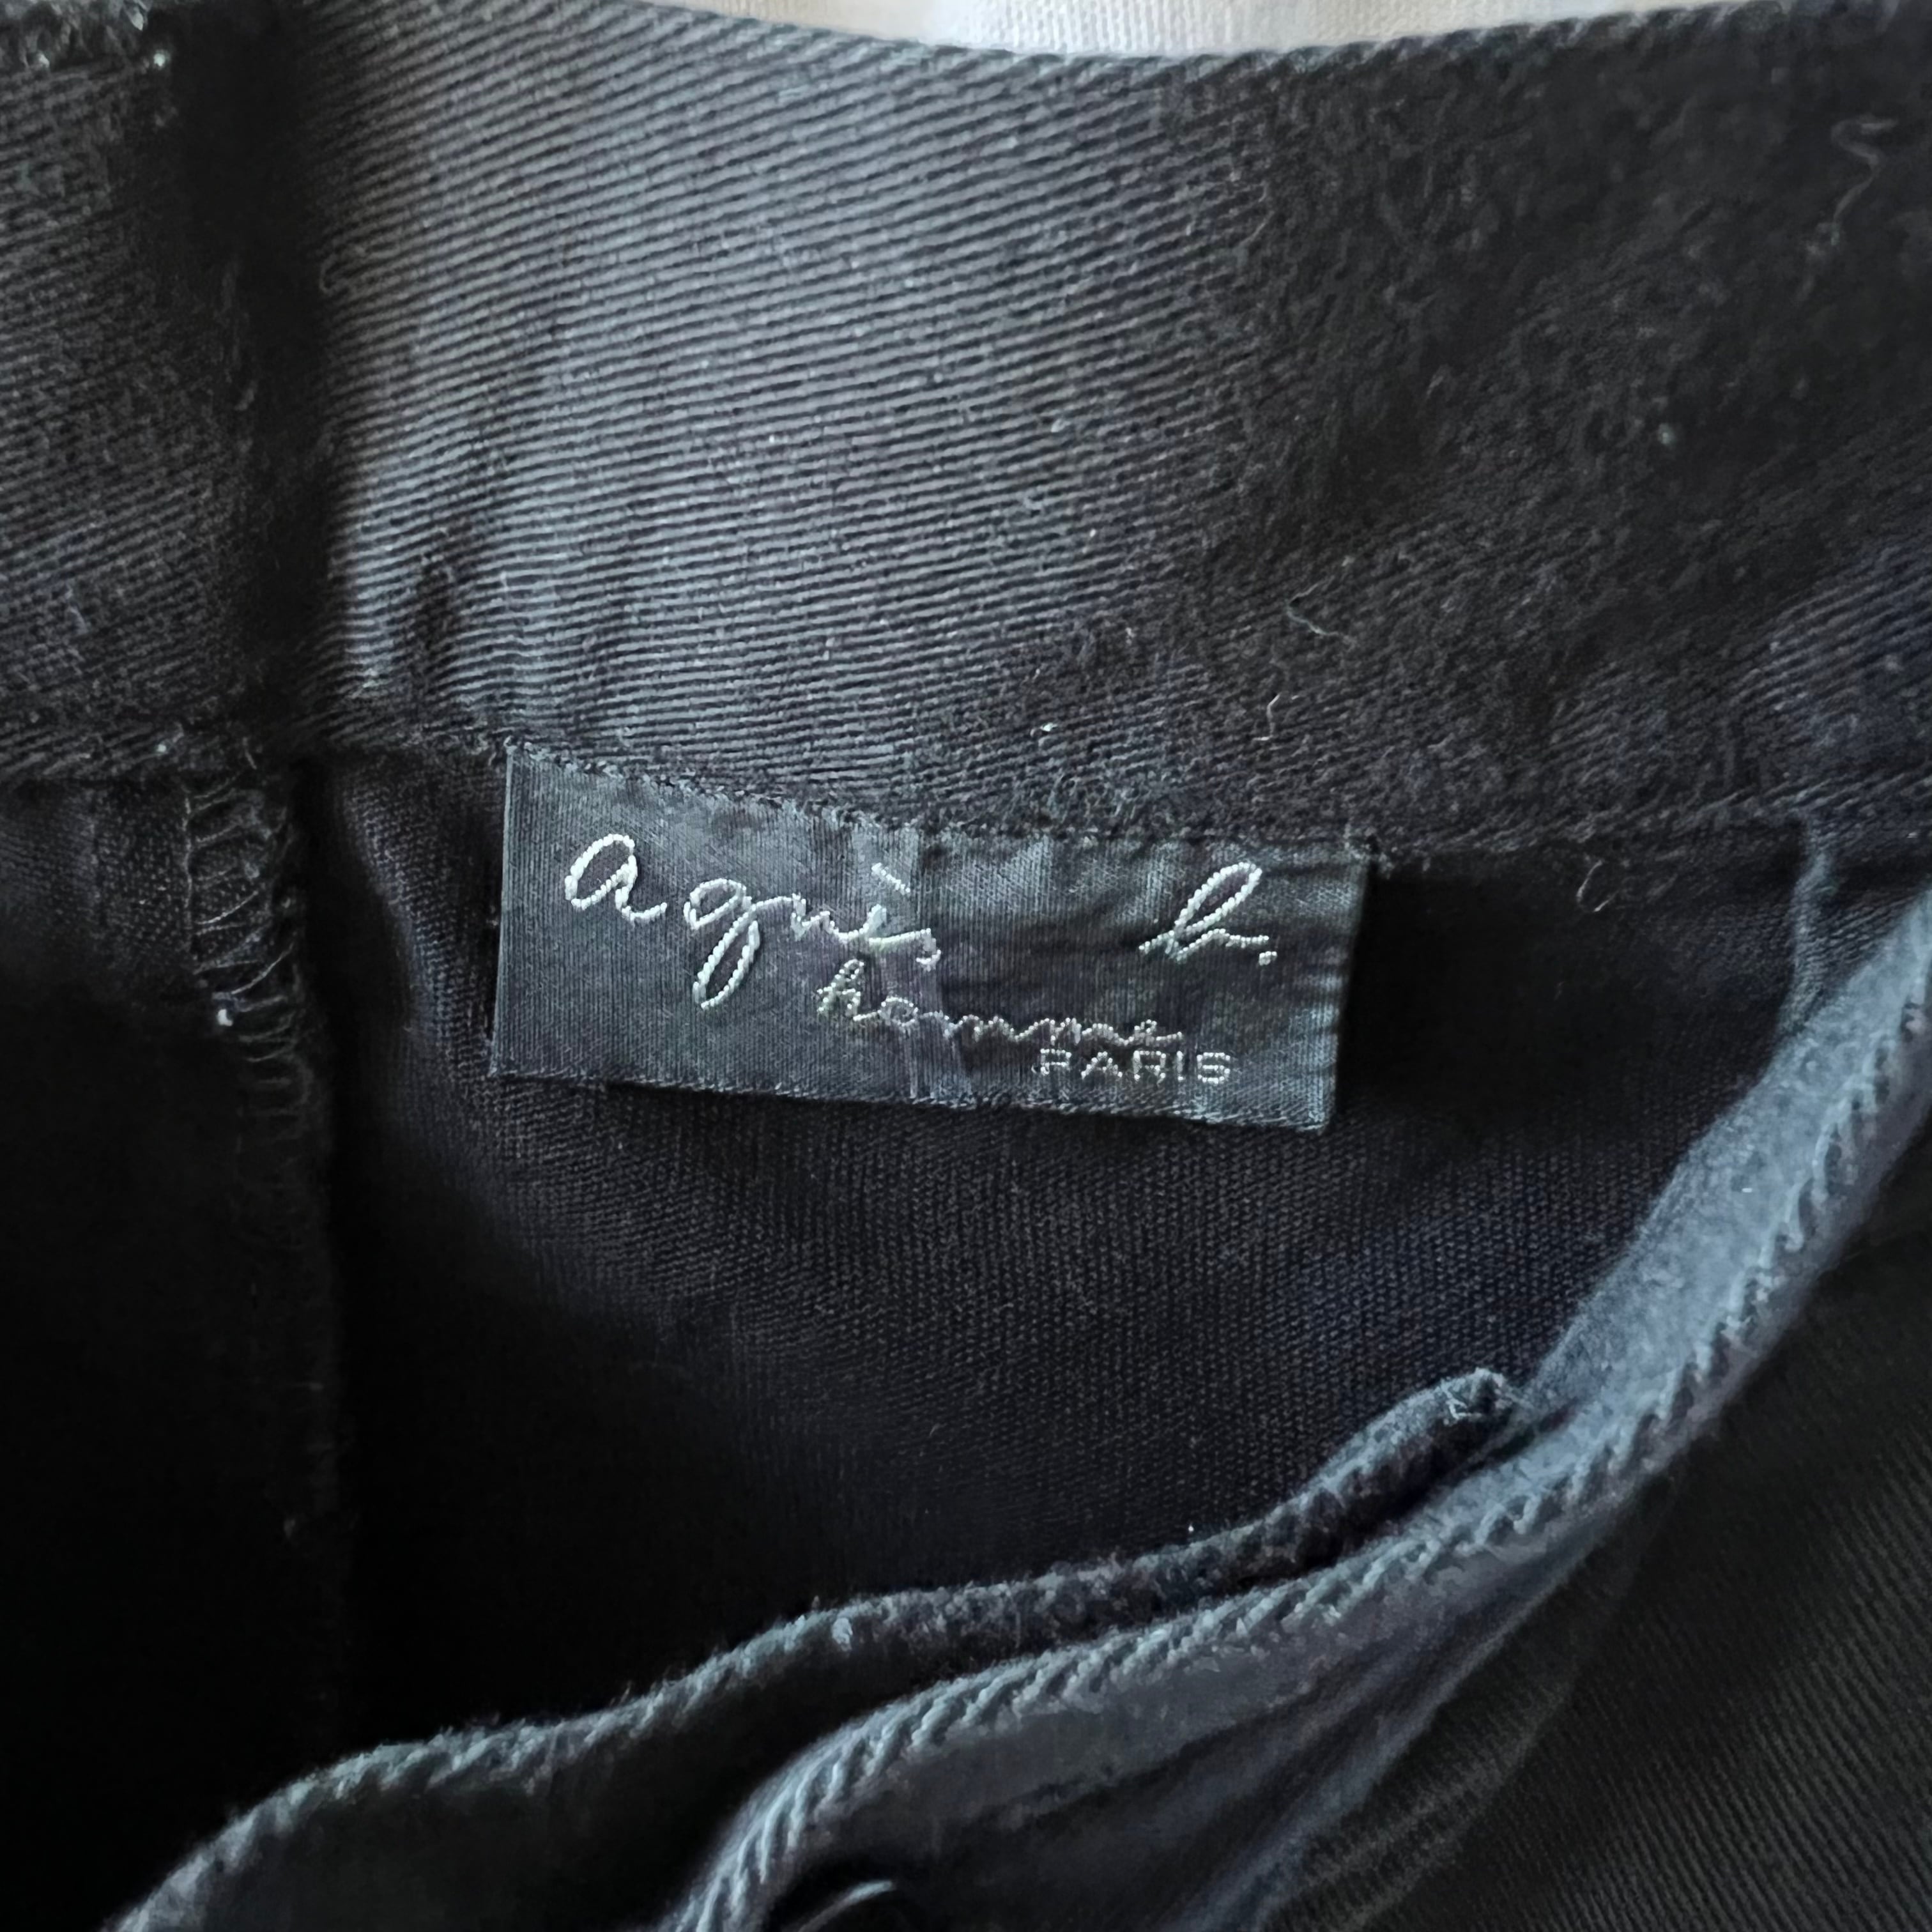 90s “agnes b.” made in france black streat cotton pants アニエスベー